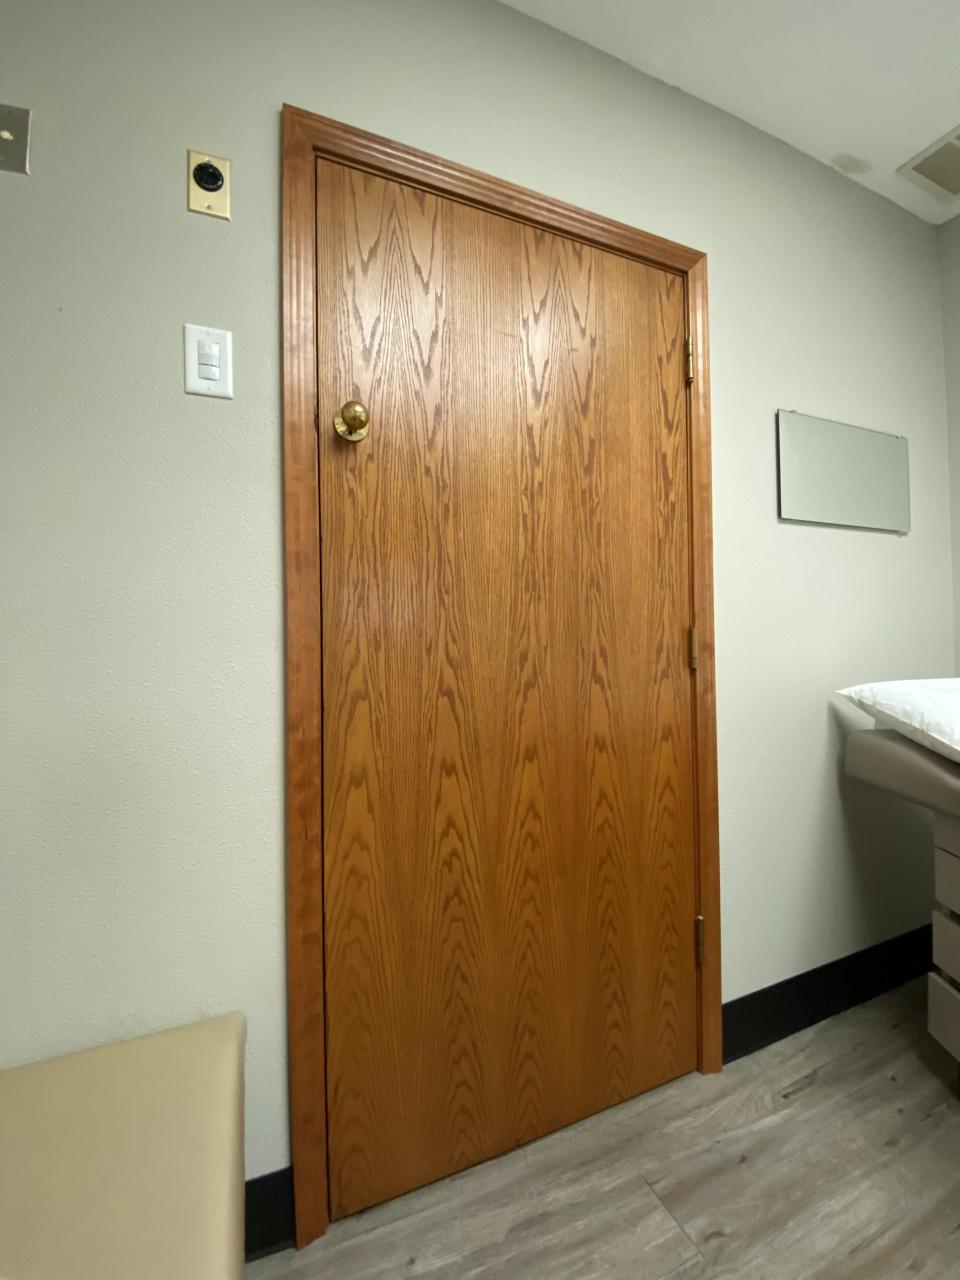 A closed wooden door in a room with a whiteboard and examination bed on the right side, typical of a medical office setting